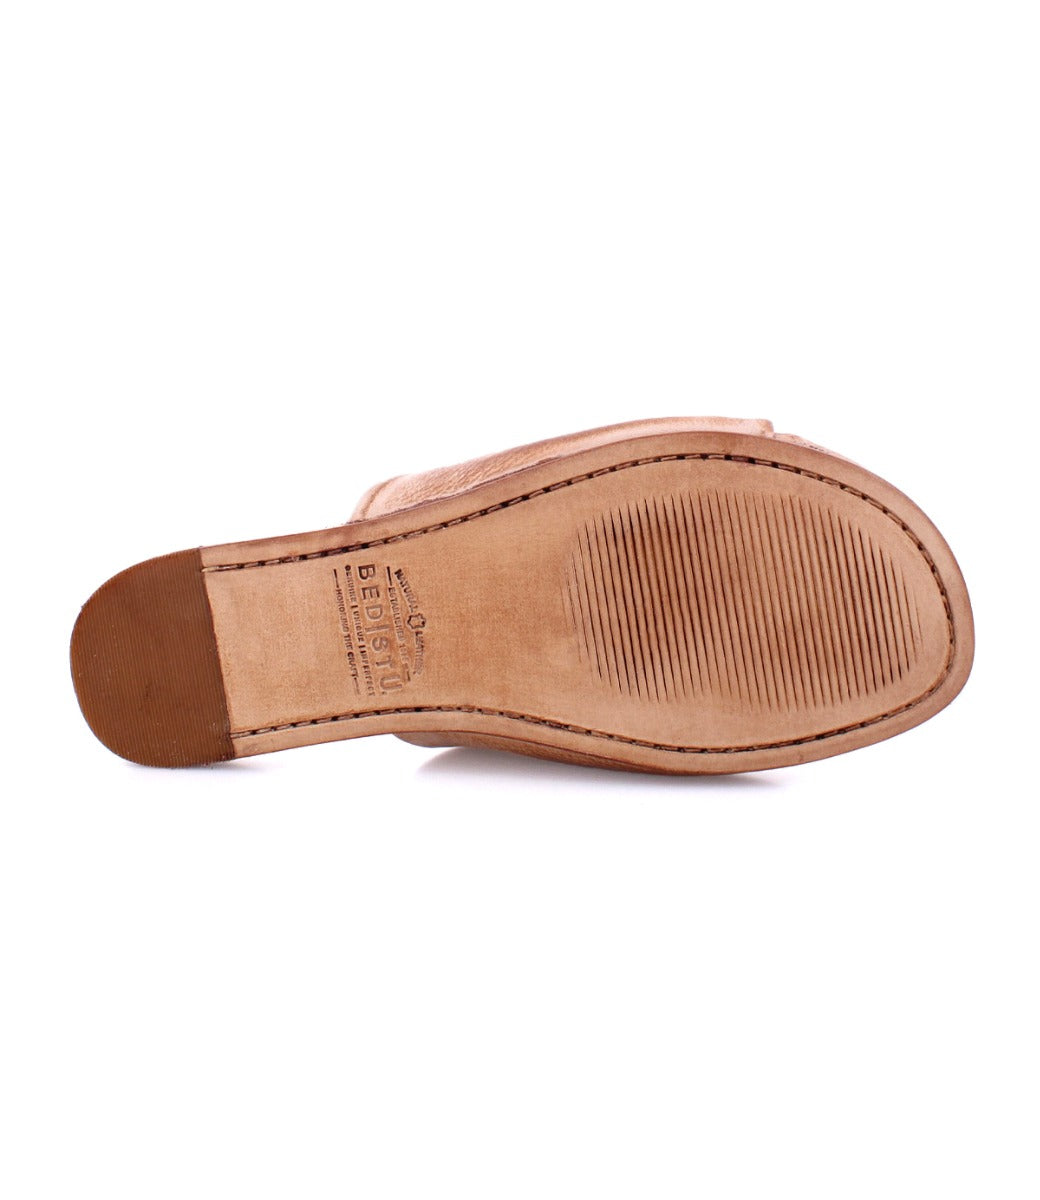 Sole of Gia tan leather slide on sandals by Bed Stu.